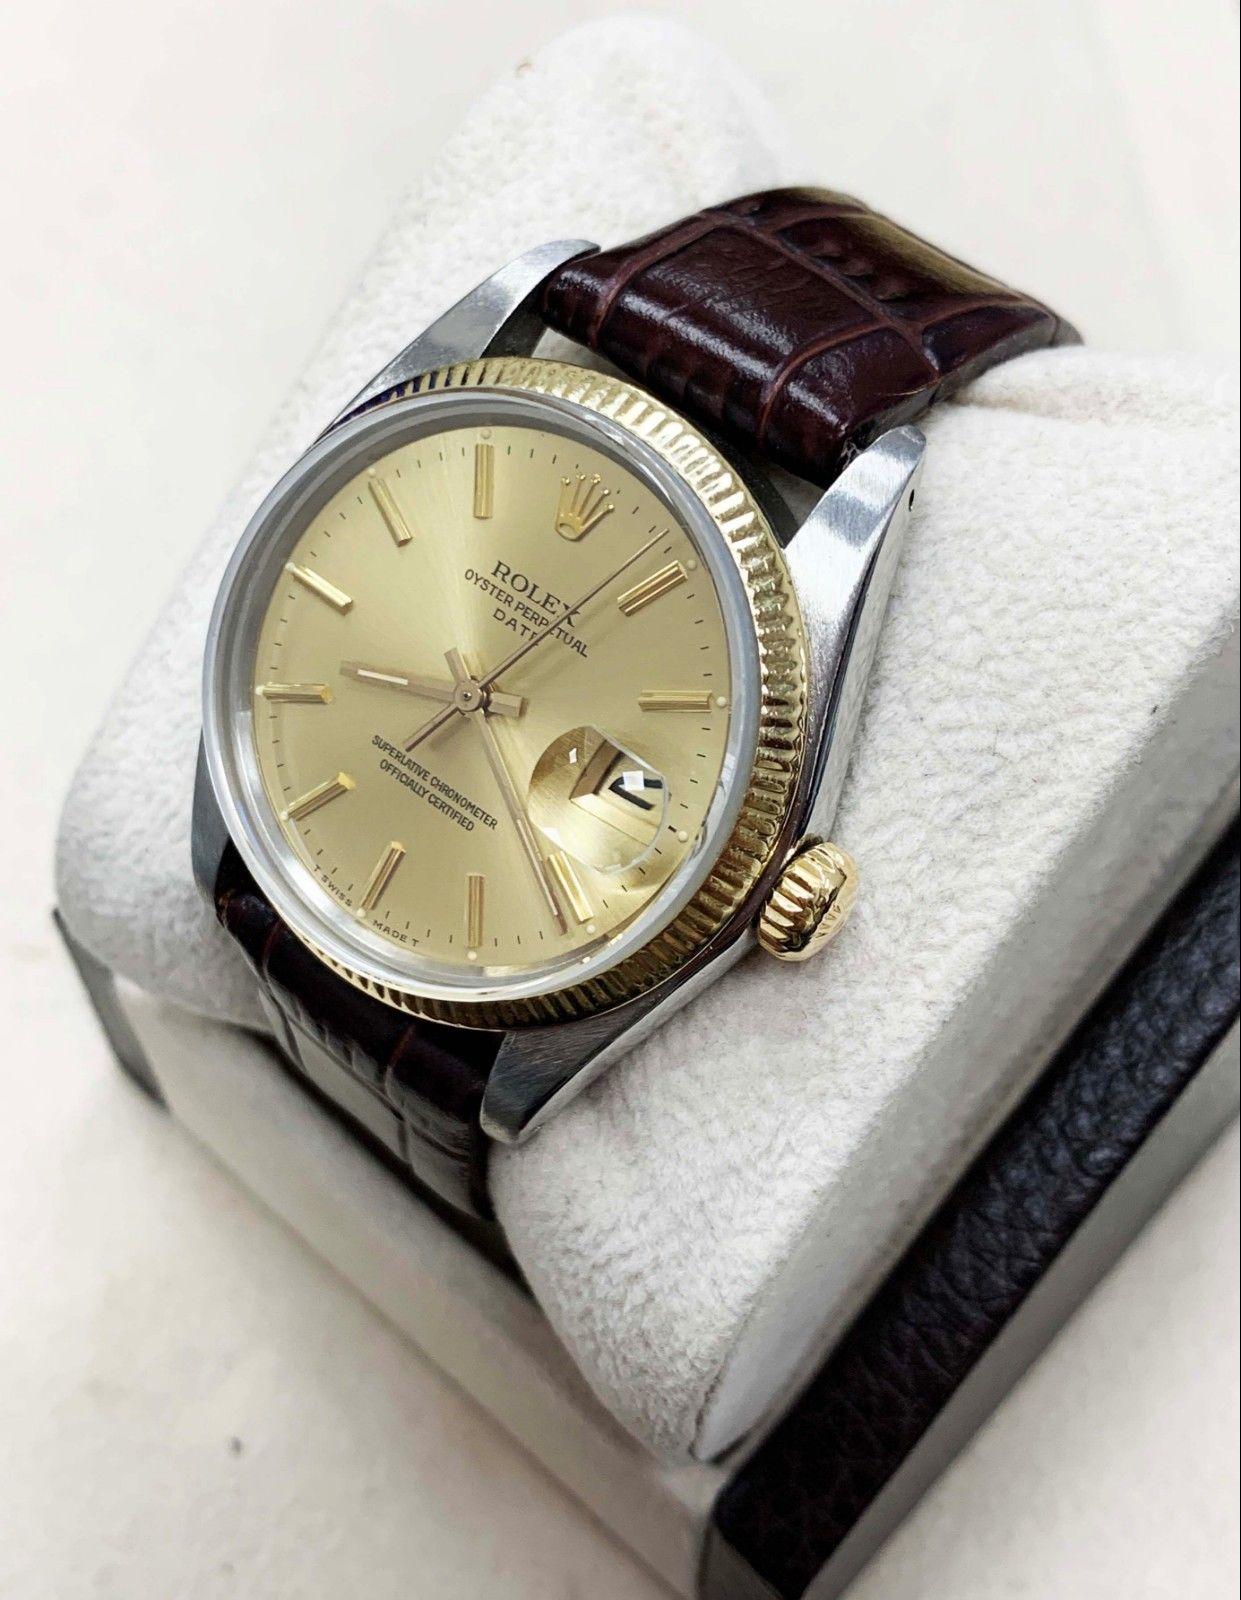 Style Number: 1500
Serial: 5446***
Model: Date
Case Material: Stainless Steel
Band: Custom Leather Band
Bezel: 14K Yellow Gold
Dial: Champagne
Face: Sapphire Crystal 
Case Size: 34mm
Includes: 
-Elegant Watch Box
-Certified Appraisal 
-6 Month